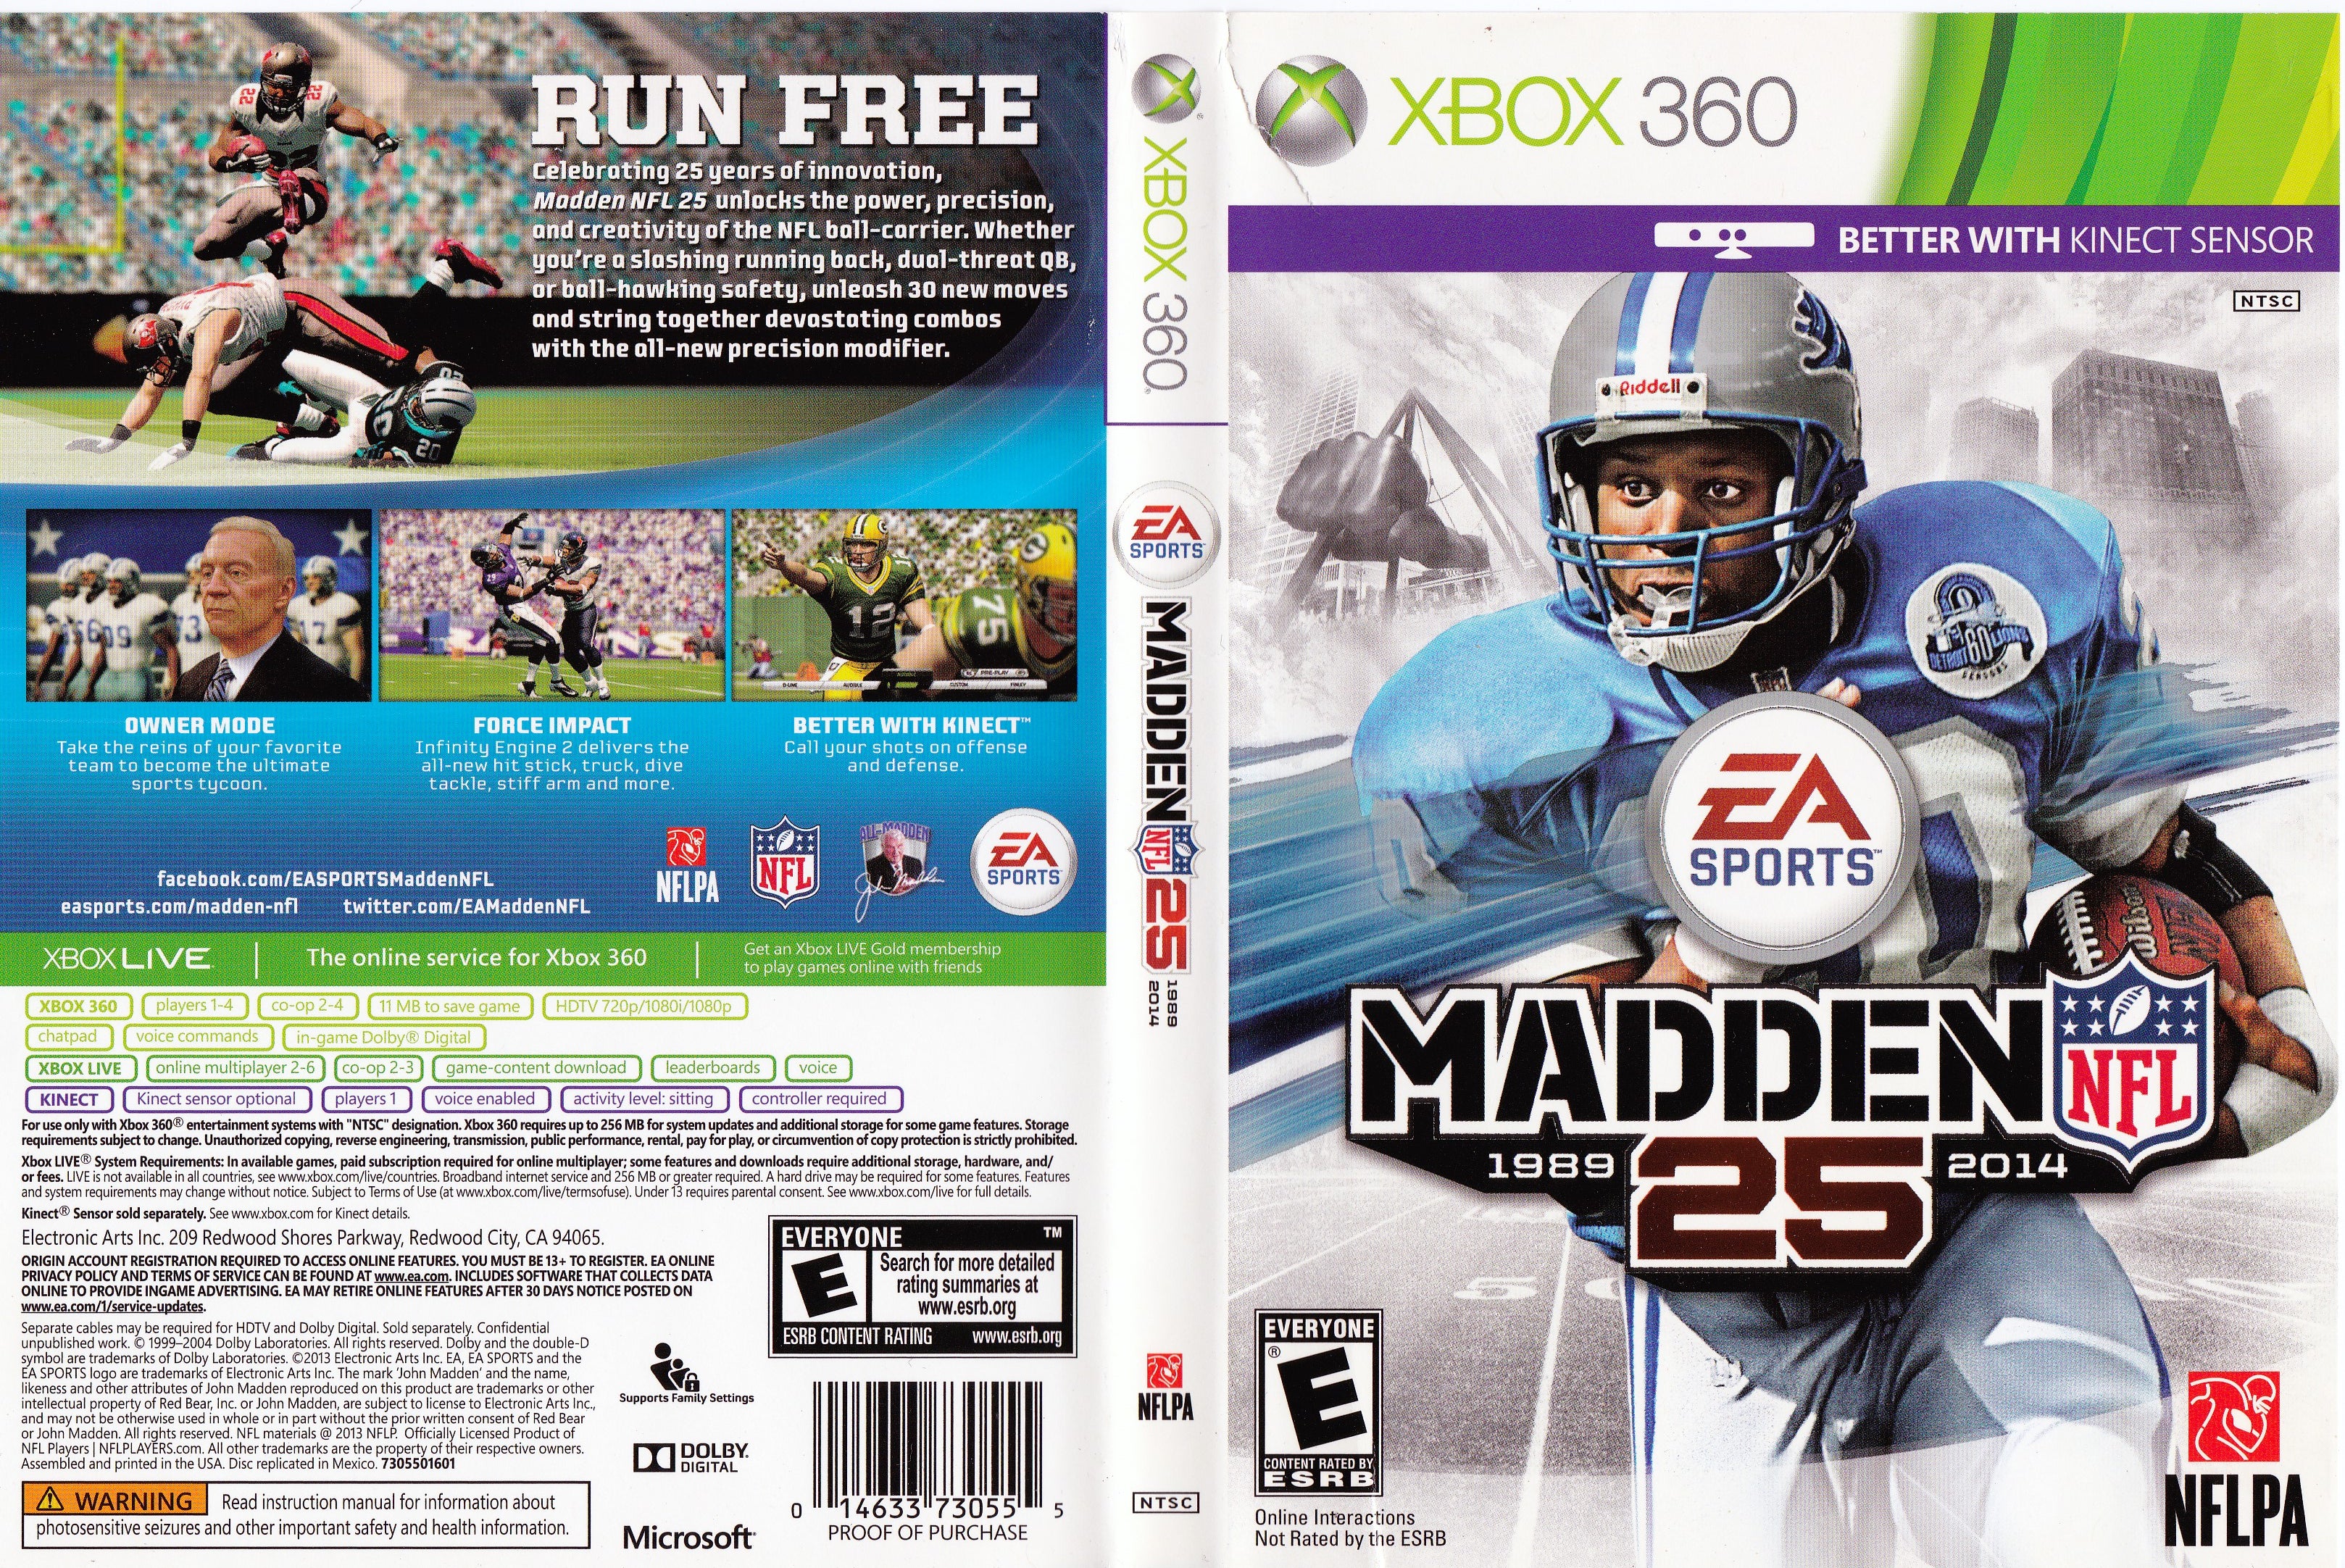 madden 25 on ps4